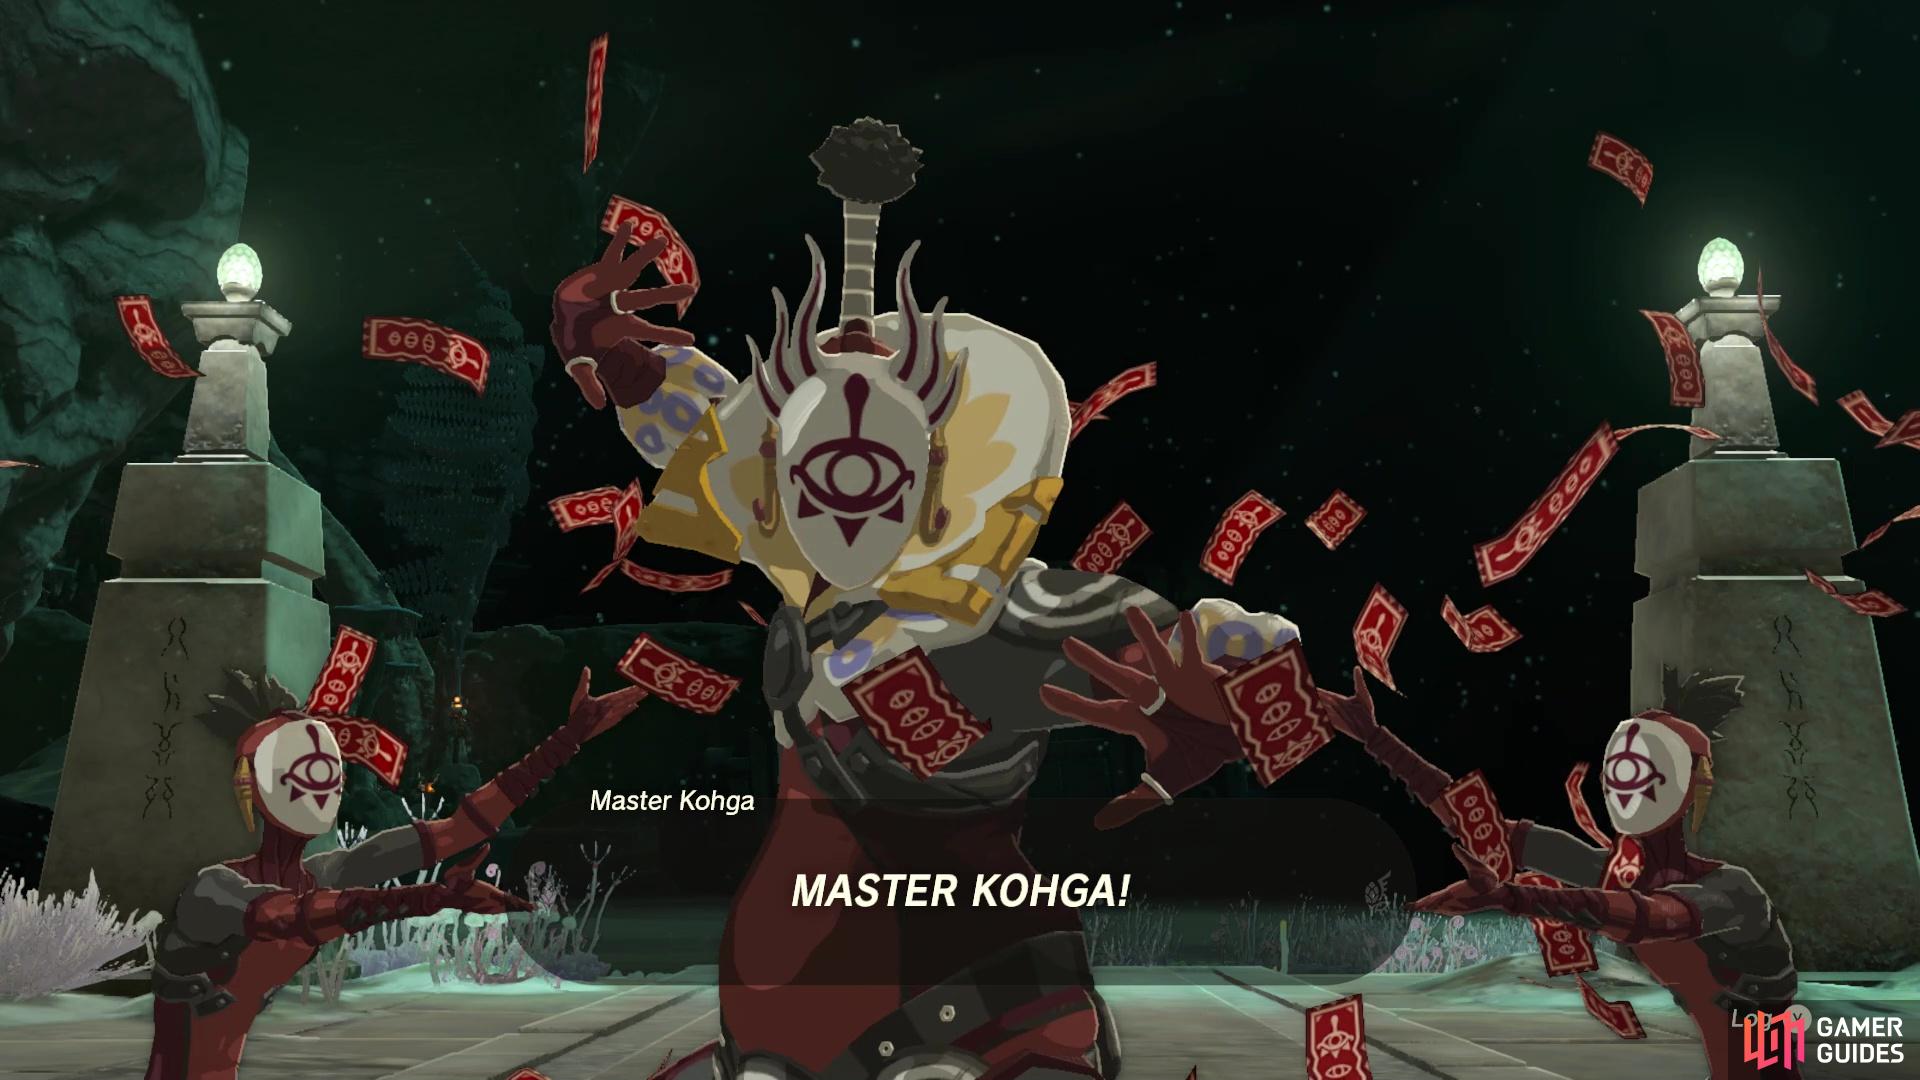 Master Kohga has returned, to be a thorn in your side!